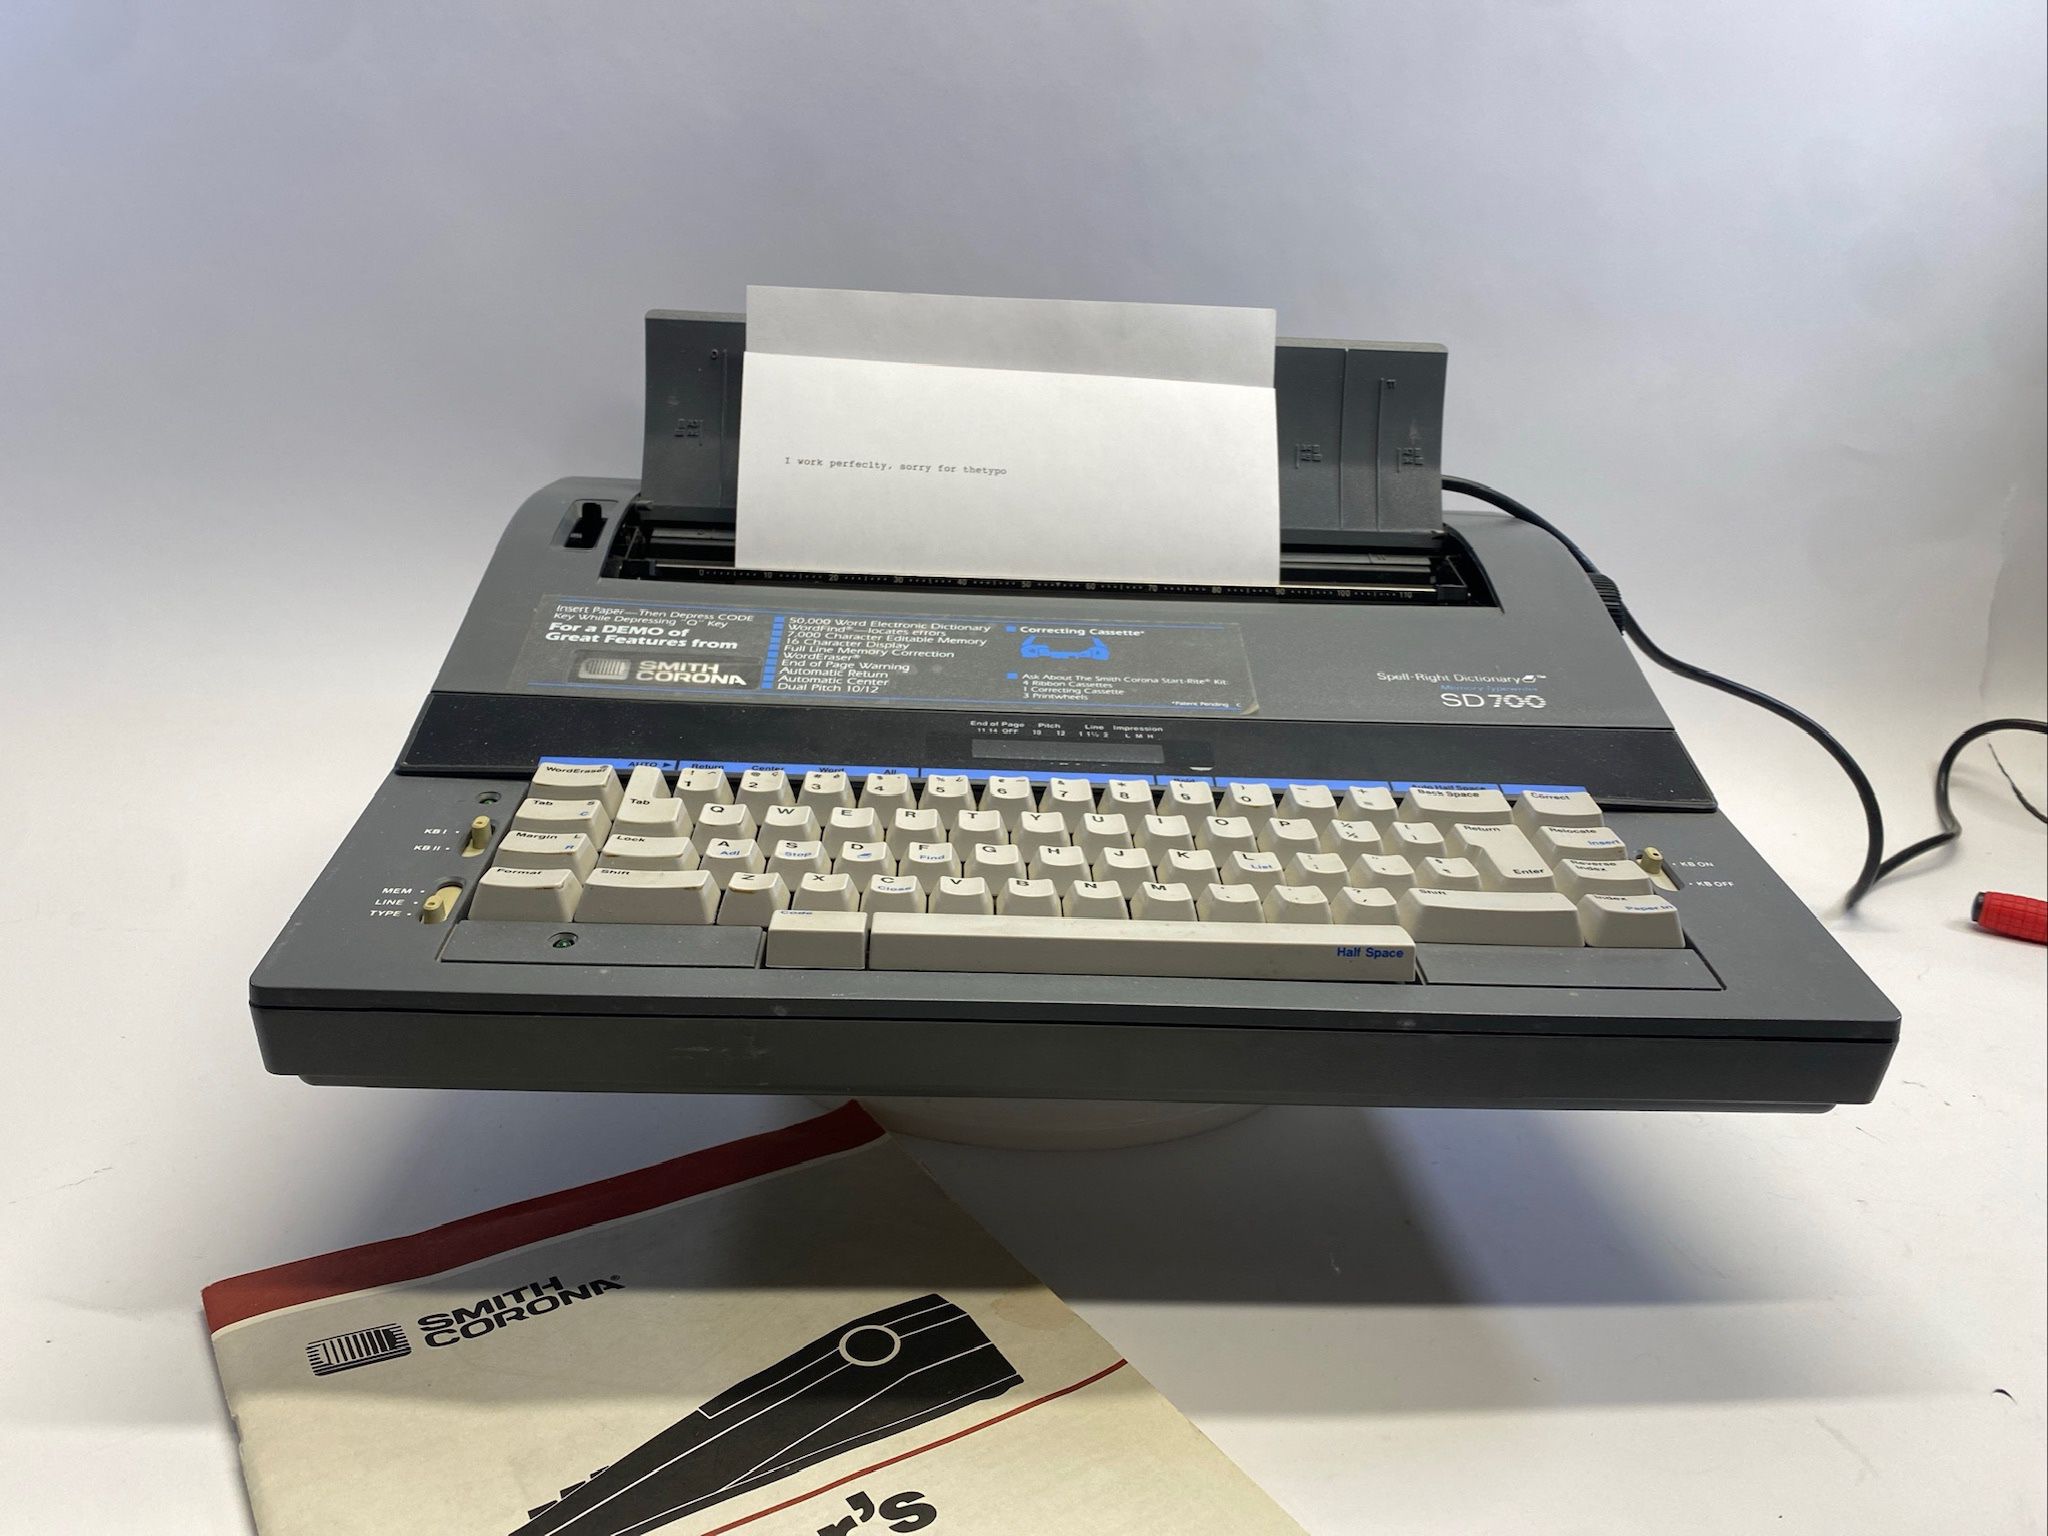 Smith Corona SD700 Spell Right Dictionary Memory Electronic Typewriter w/ Cover